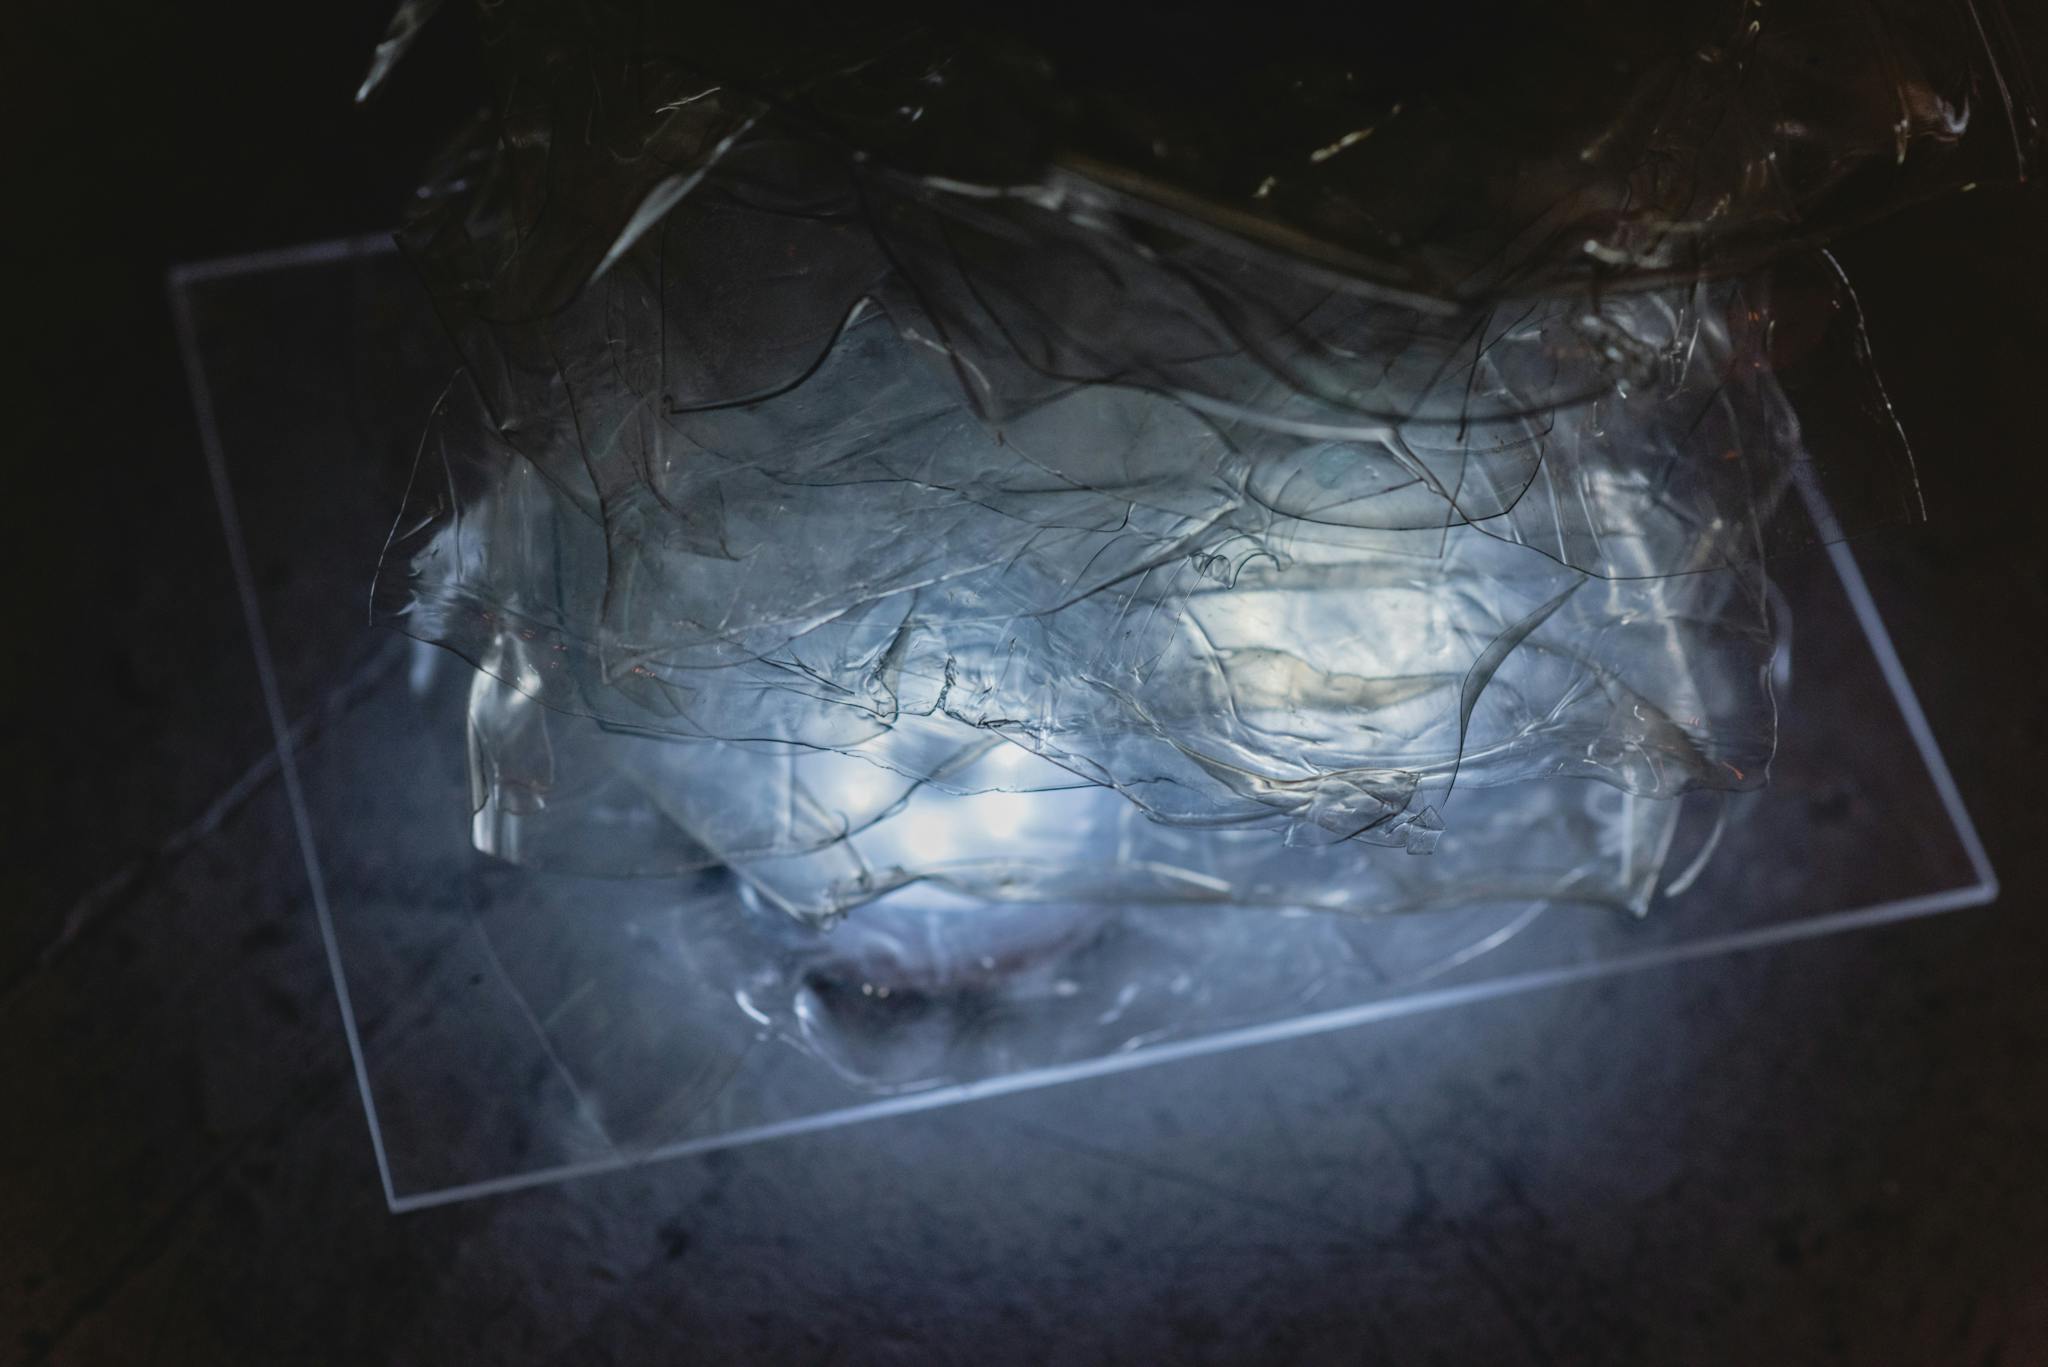 Image shows two lights lighting up a clear piece of perspex and shredded plastic above